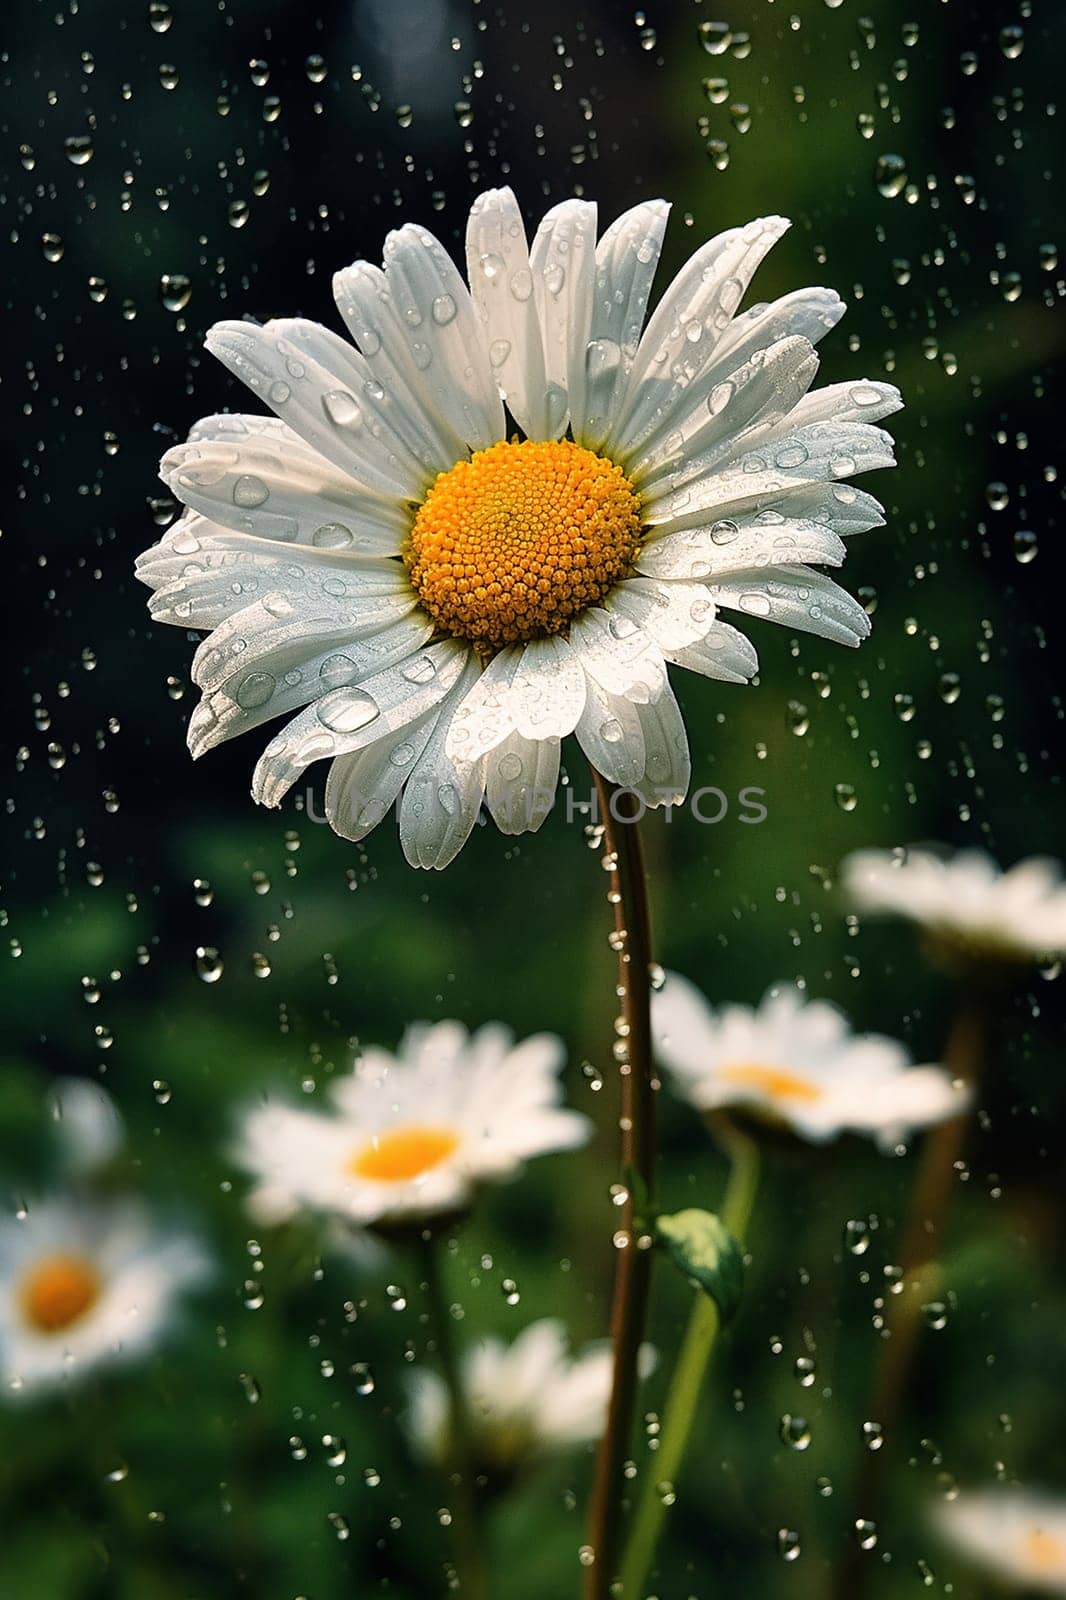 A daisy with water droplets against a blurred background. by Hype2art